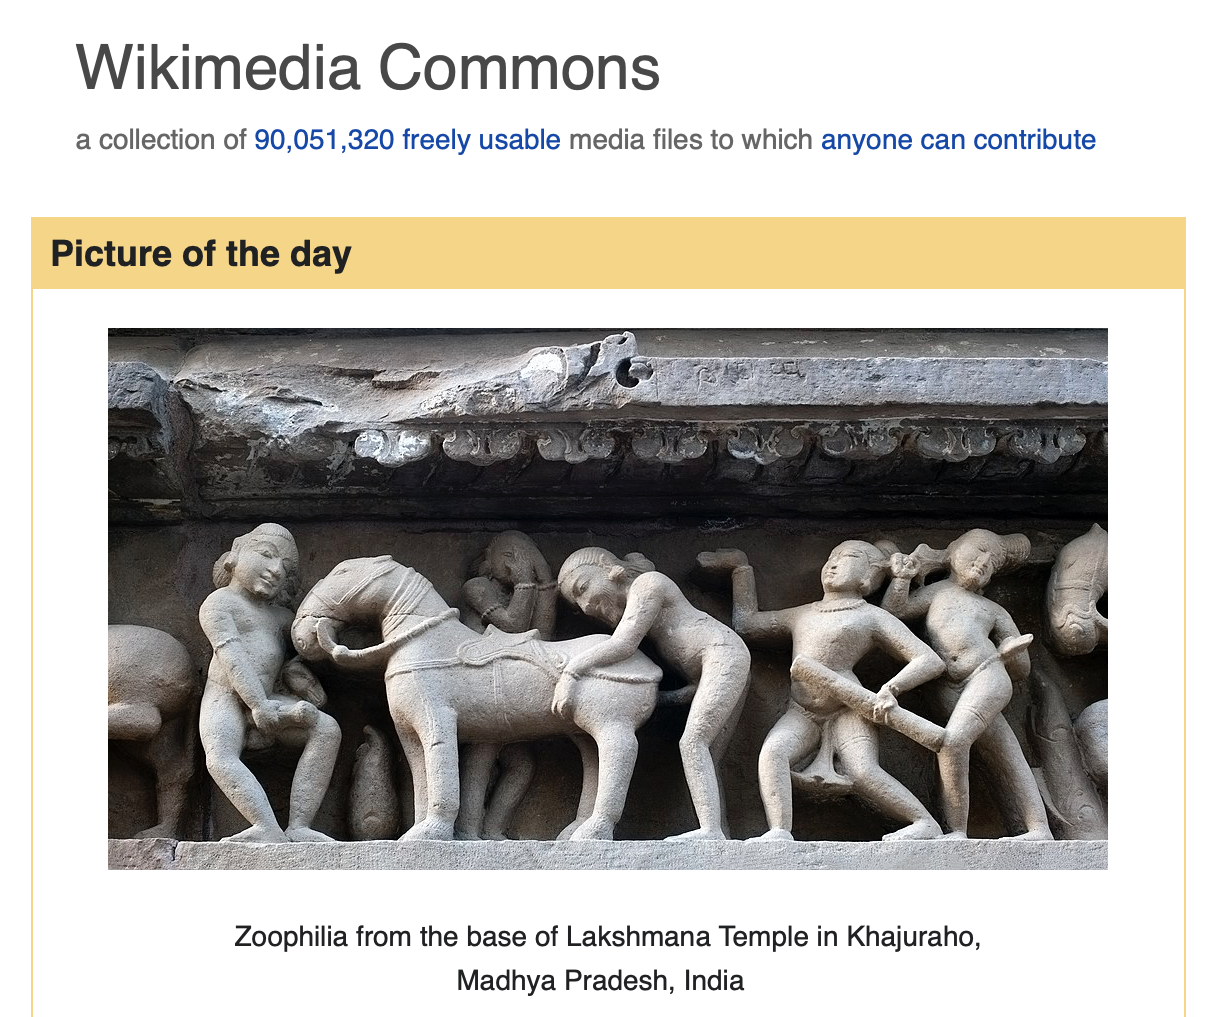 Wikipedia's Smut Pic Of The Day - We Thought The Choice Was Very Instructive Of Who's Behind The Site